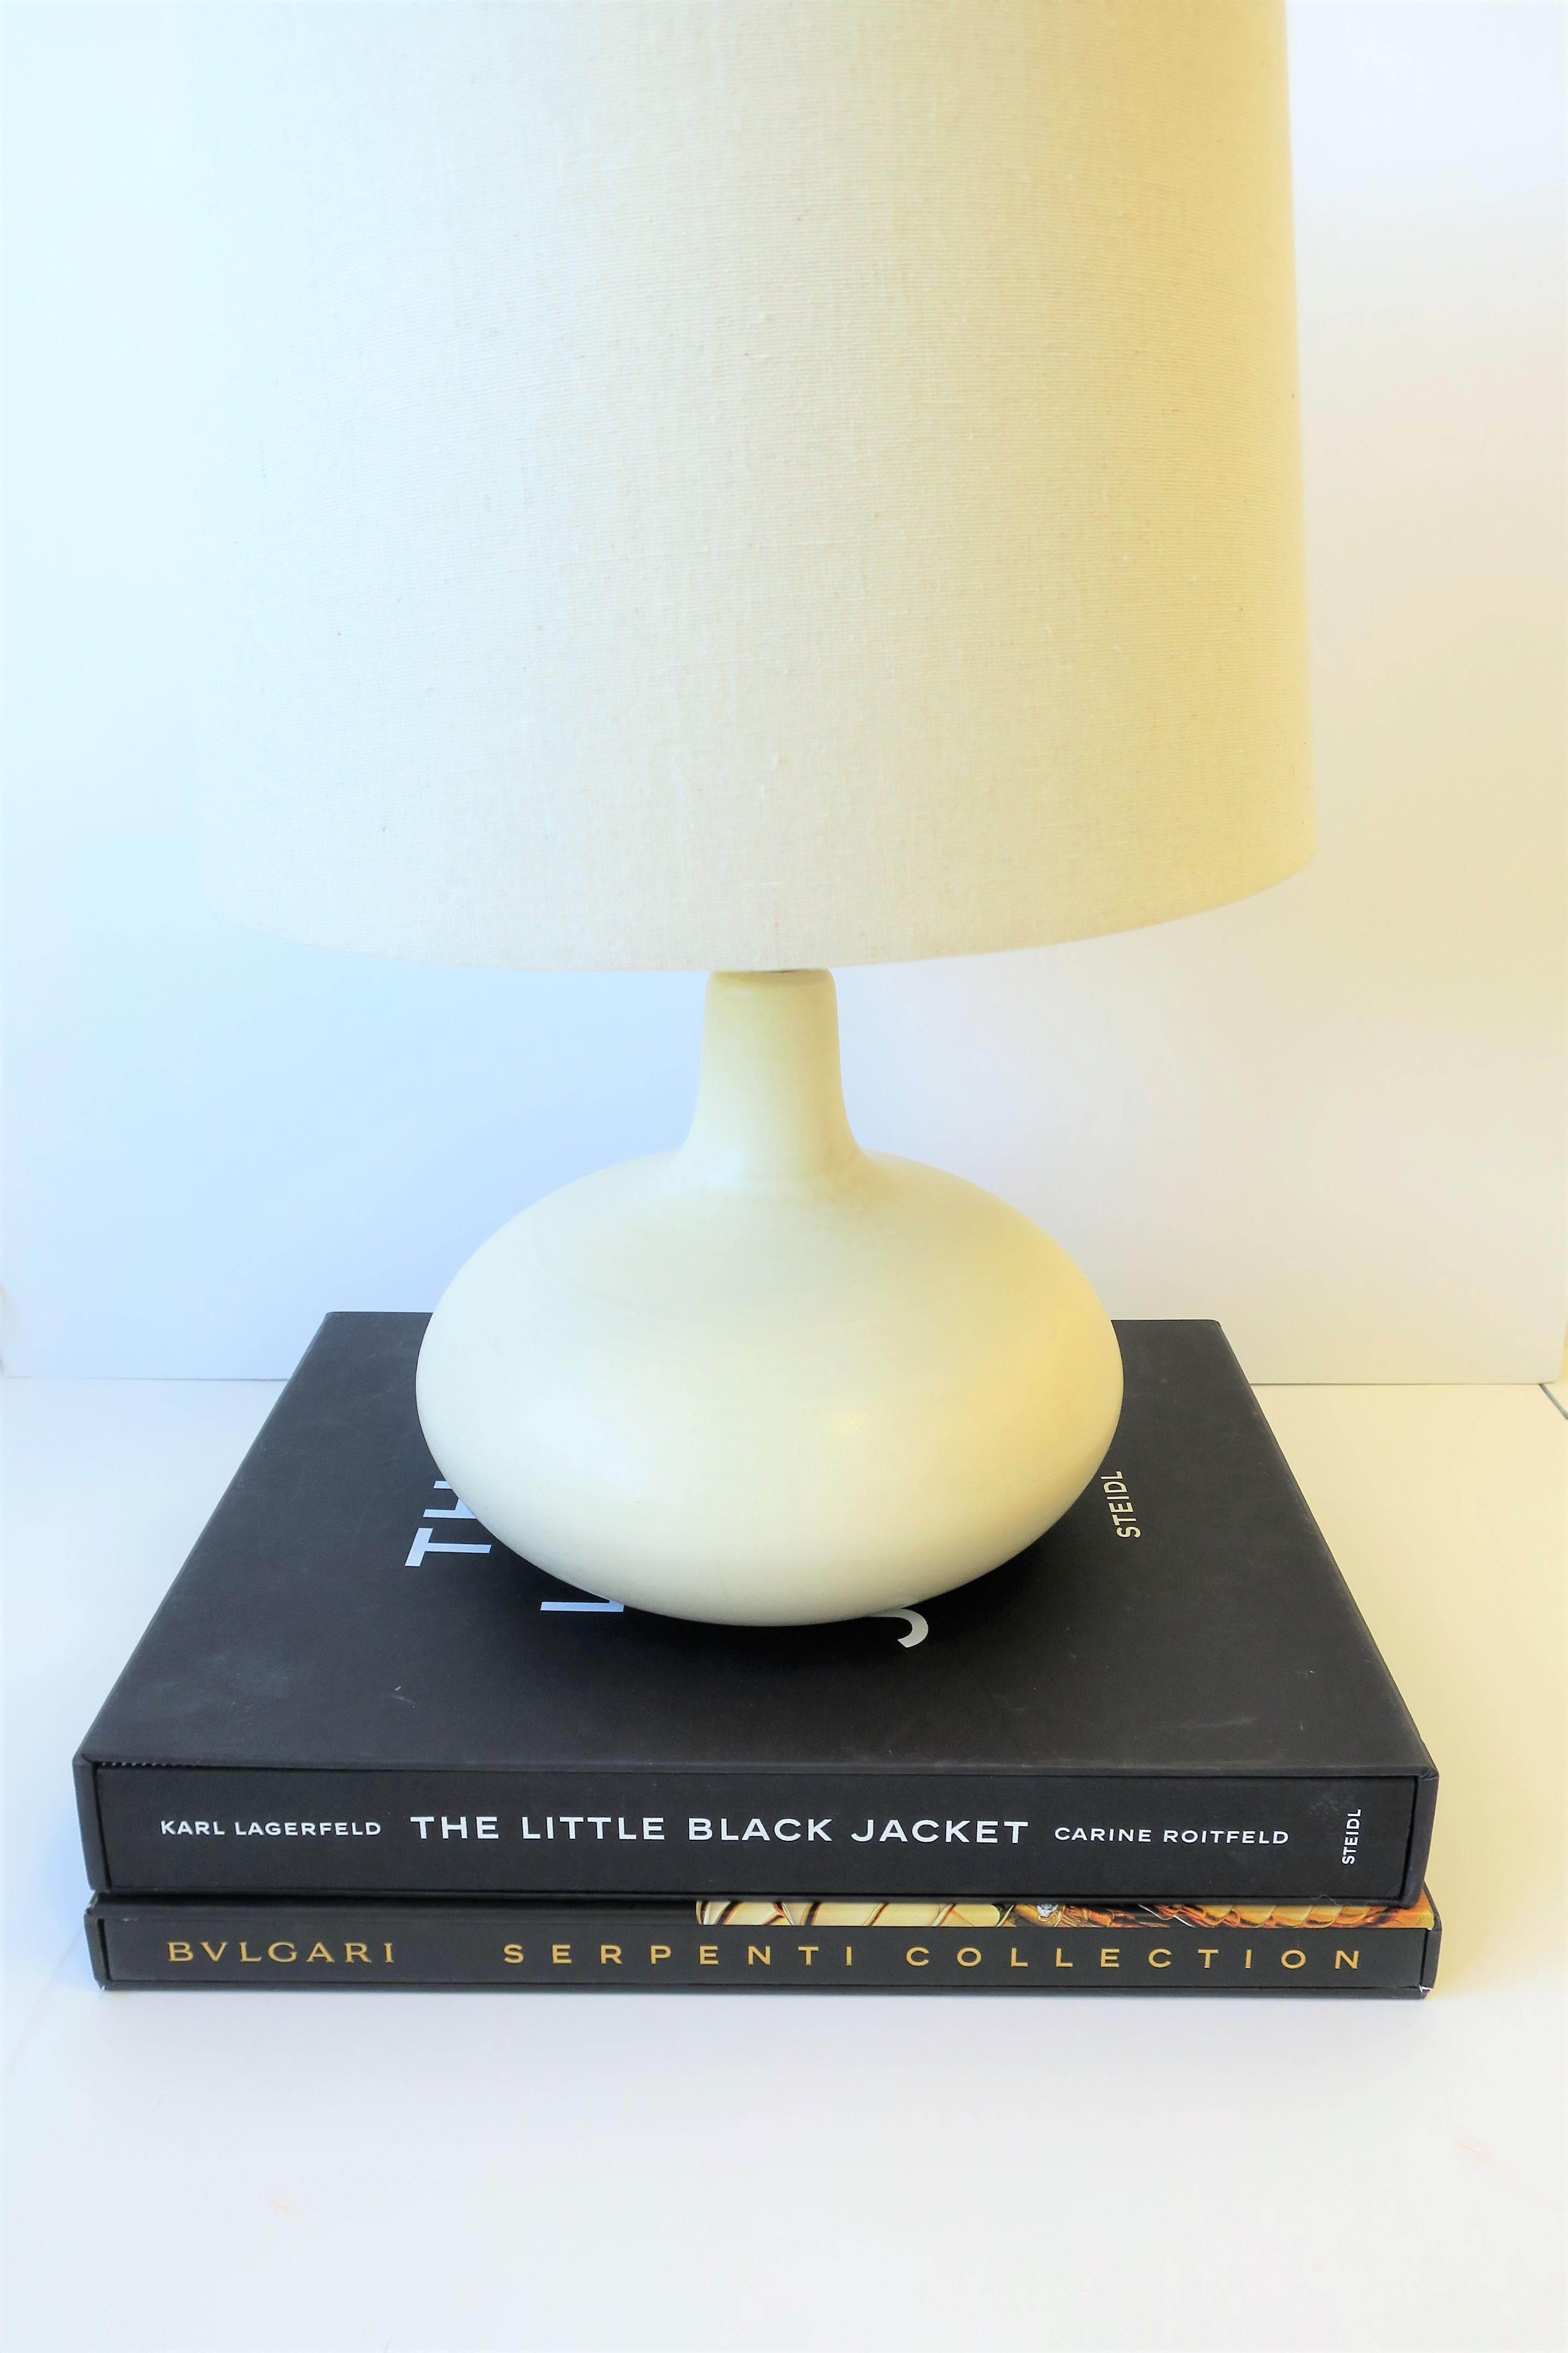 American Midcentury Modern White Pottery Desk or Table Lamp, Small